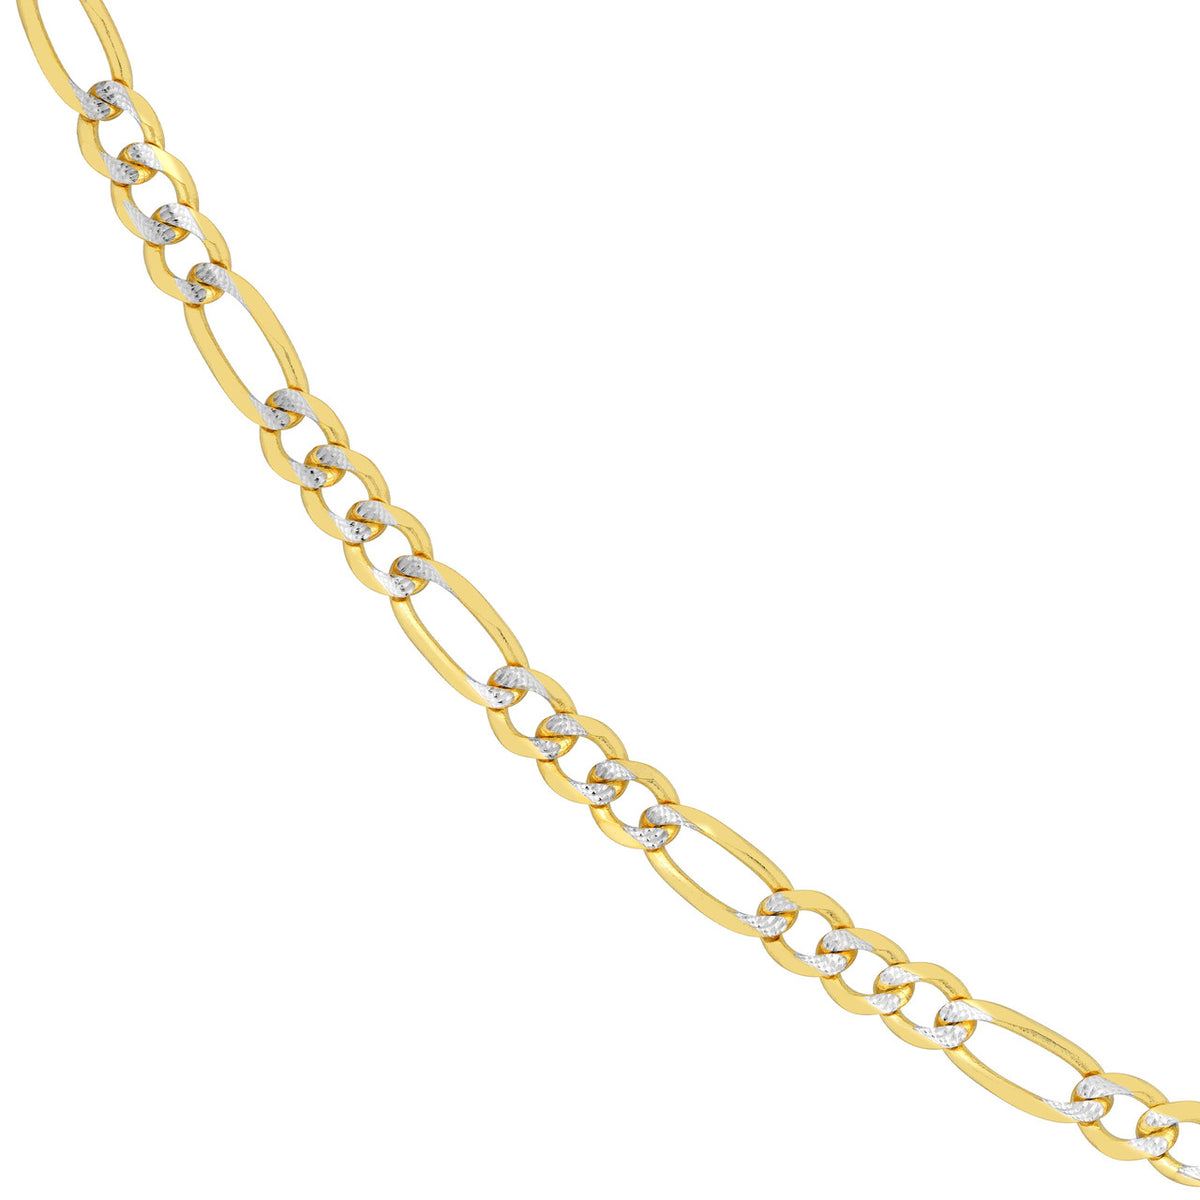 14K Yellow Gold 4.75mm Two-Tone Pave Figaro Chain Necklace with Lobster Lock